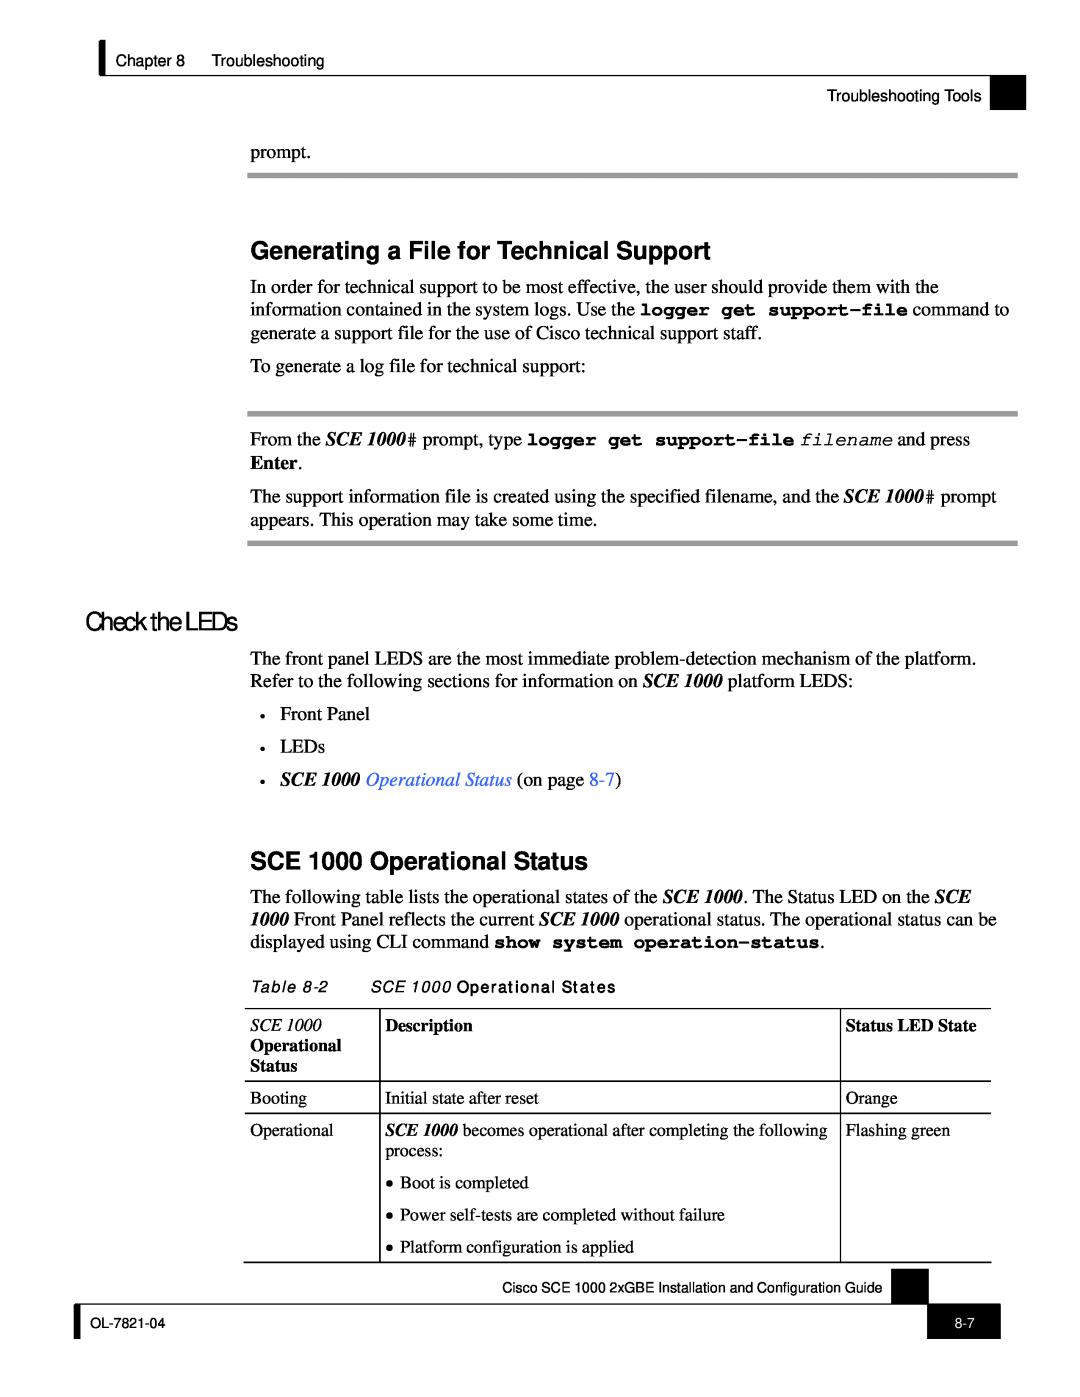 Cisco Systems SCE 1000 2xGBE manual Check the LEDs, Generating a File for Technical Support, SCE 1000 Operational Status 